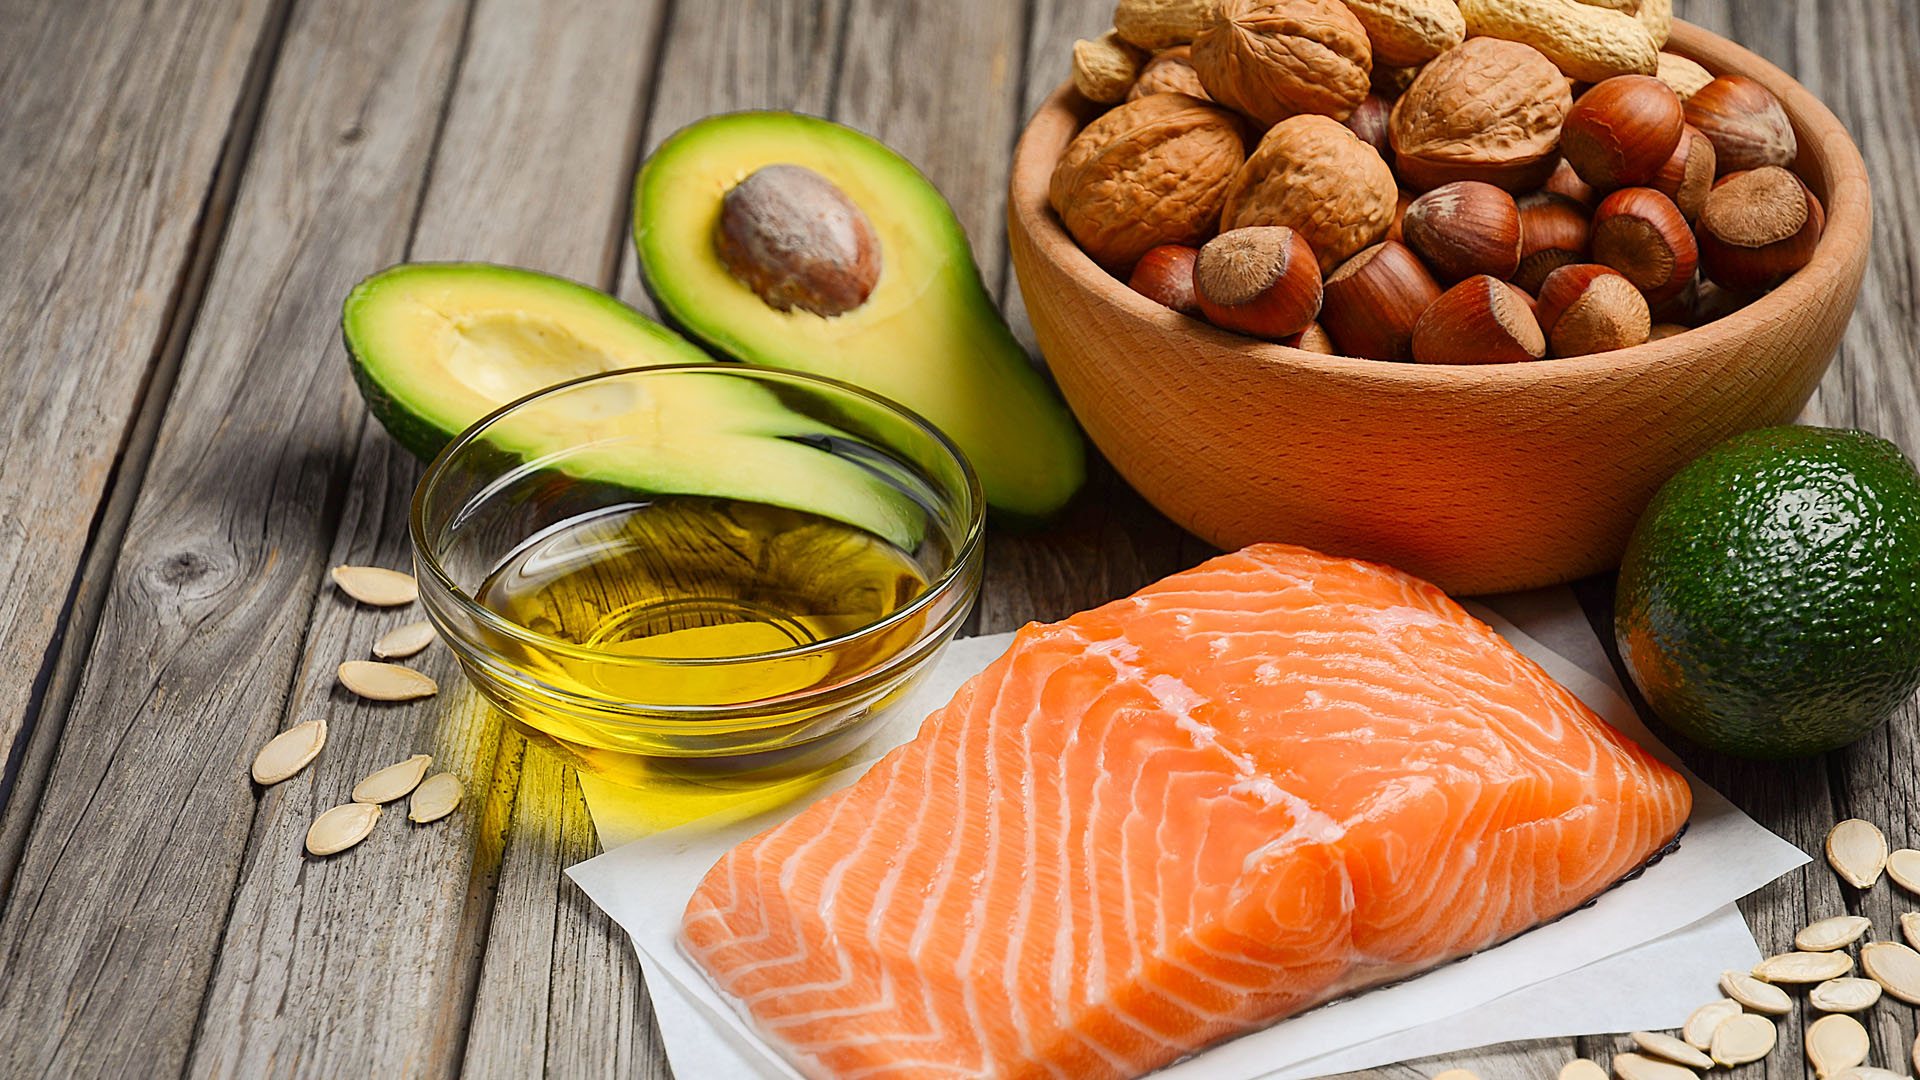 Selection of healthy fat sources: salmon, nuts, seeds, avocados and olive oil.